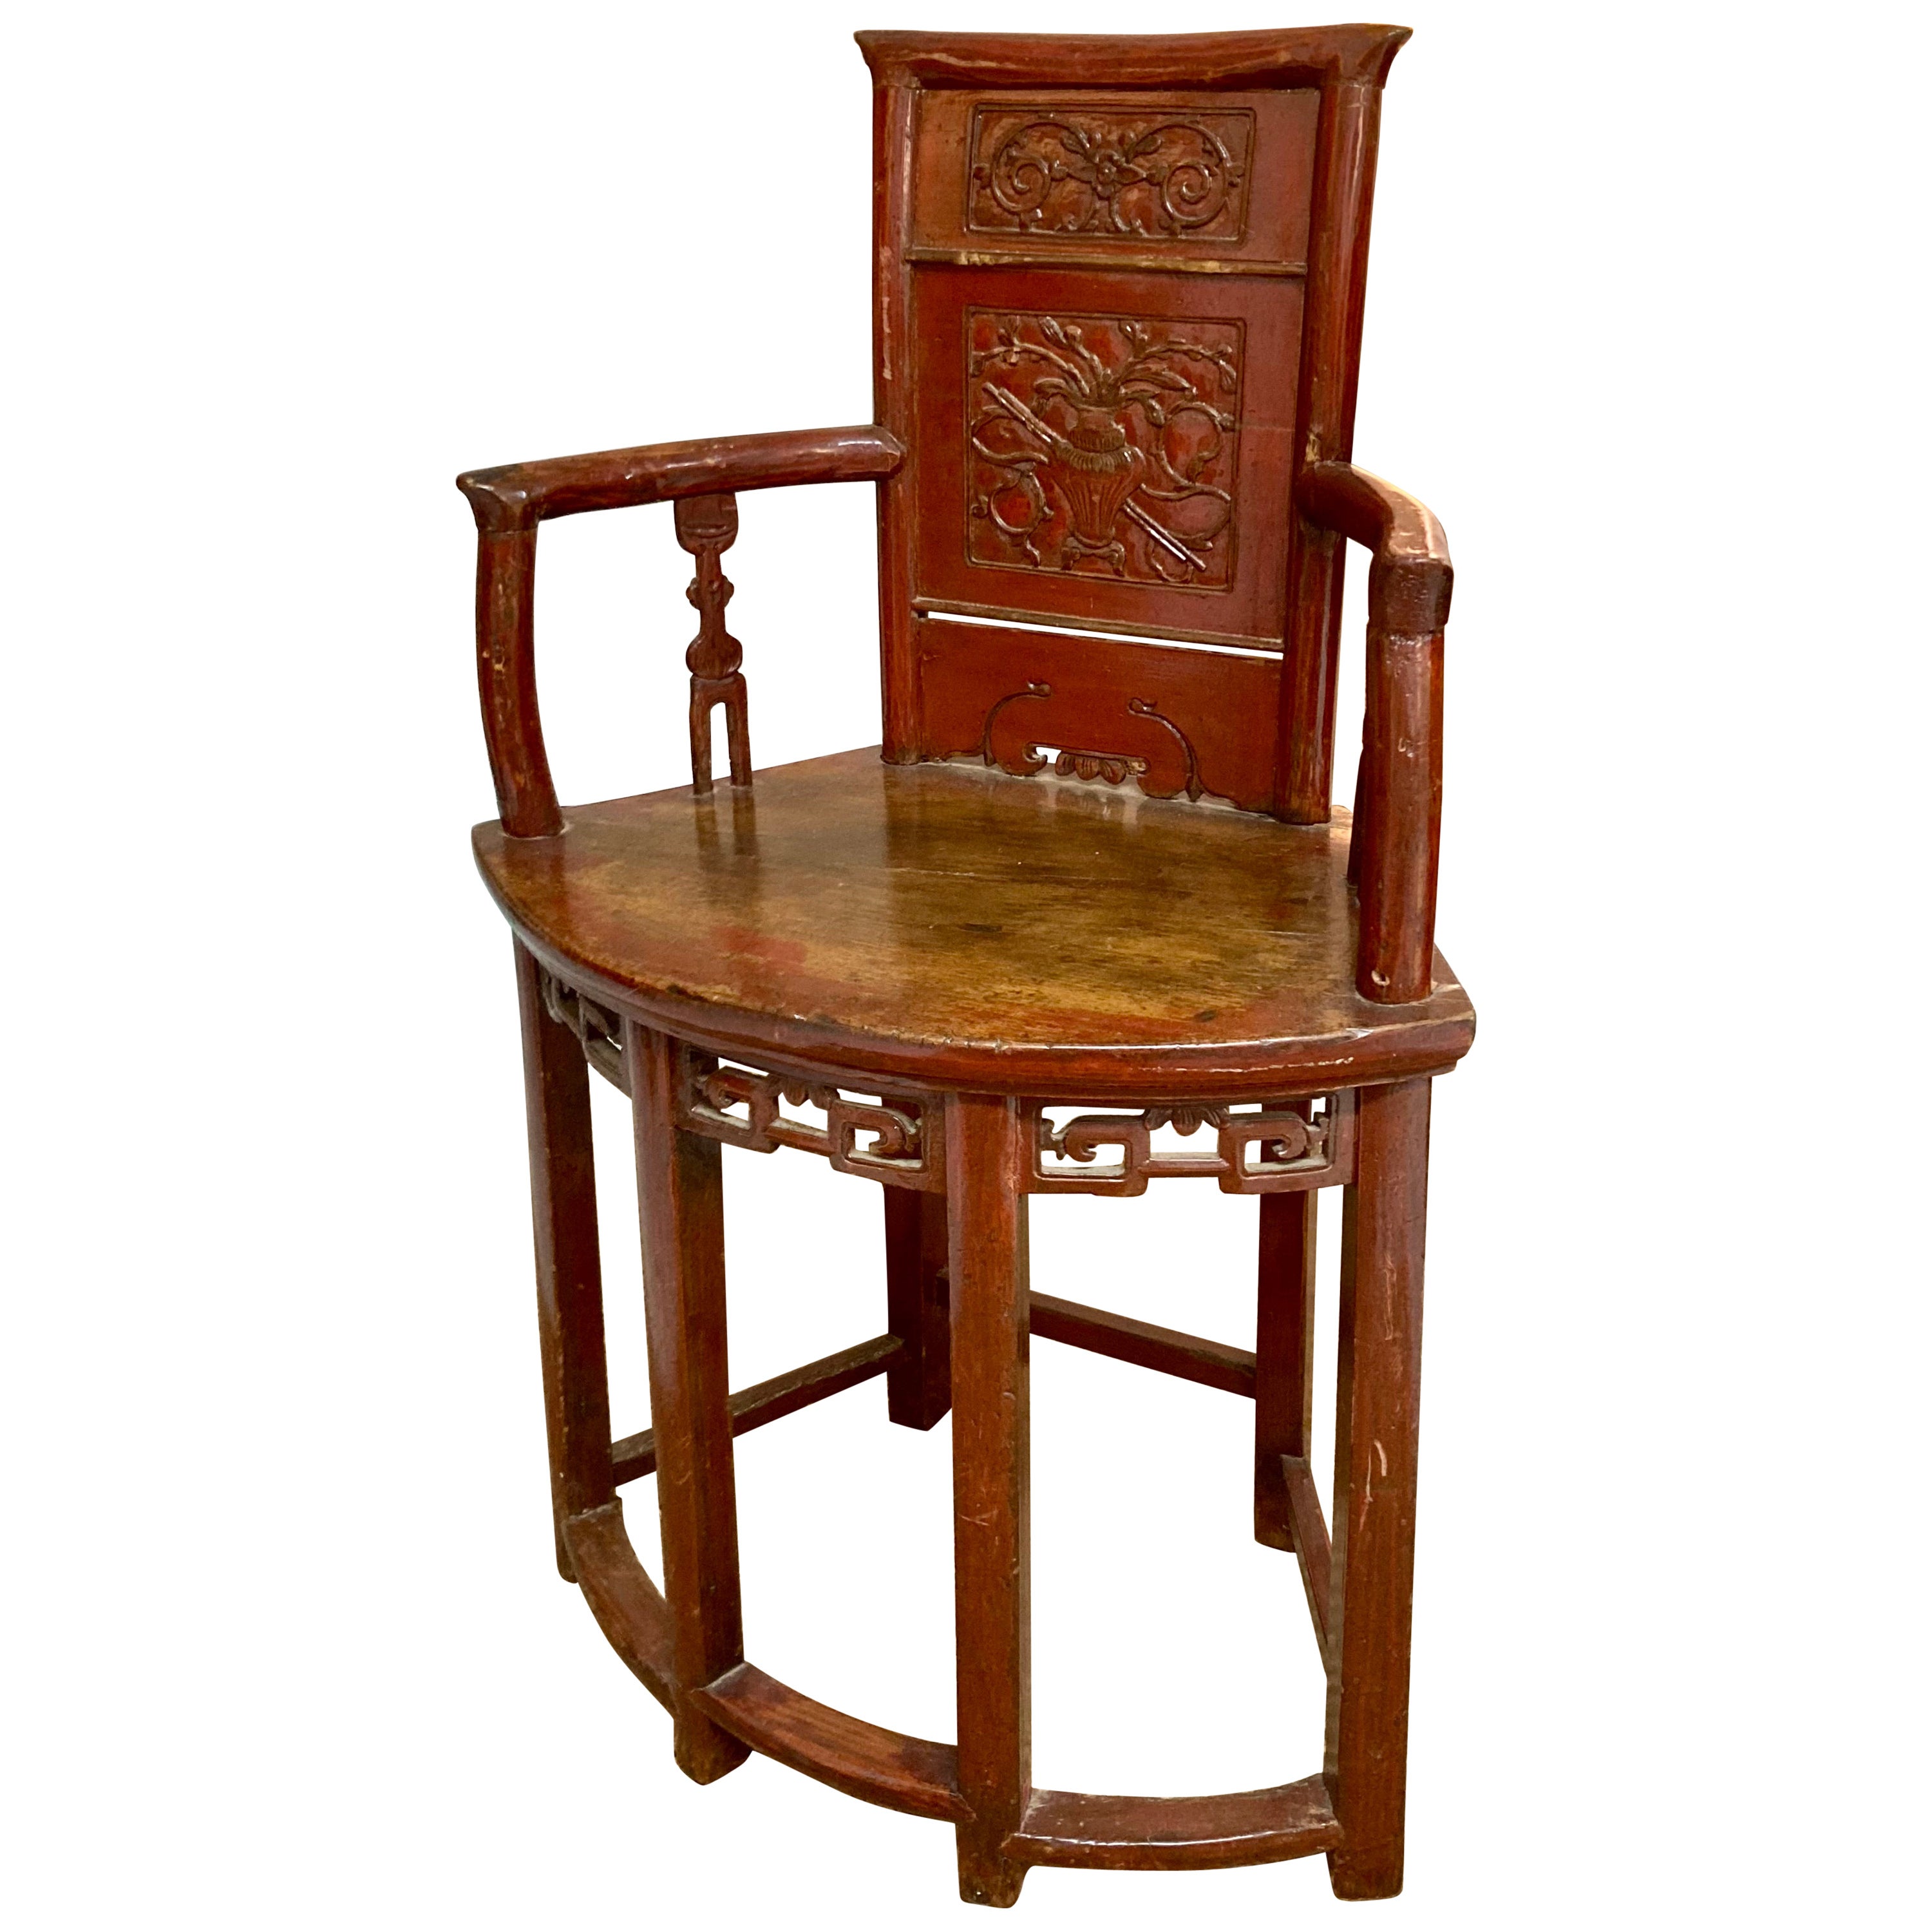 What were corner chairs used for?